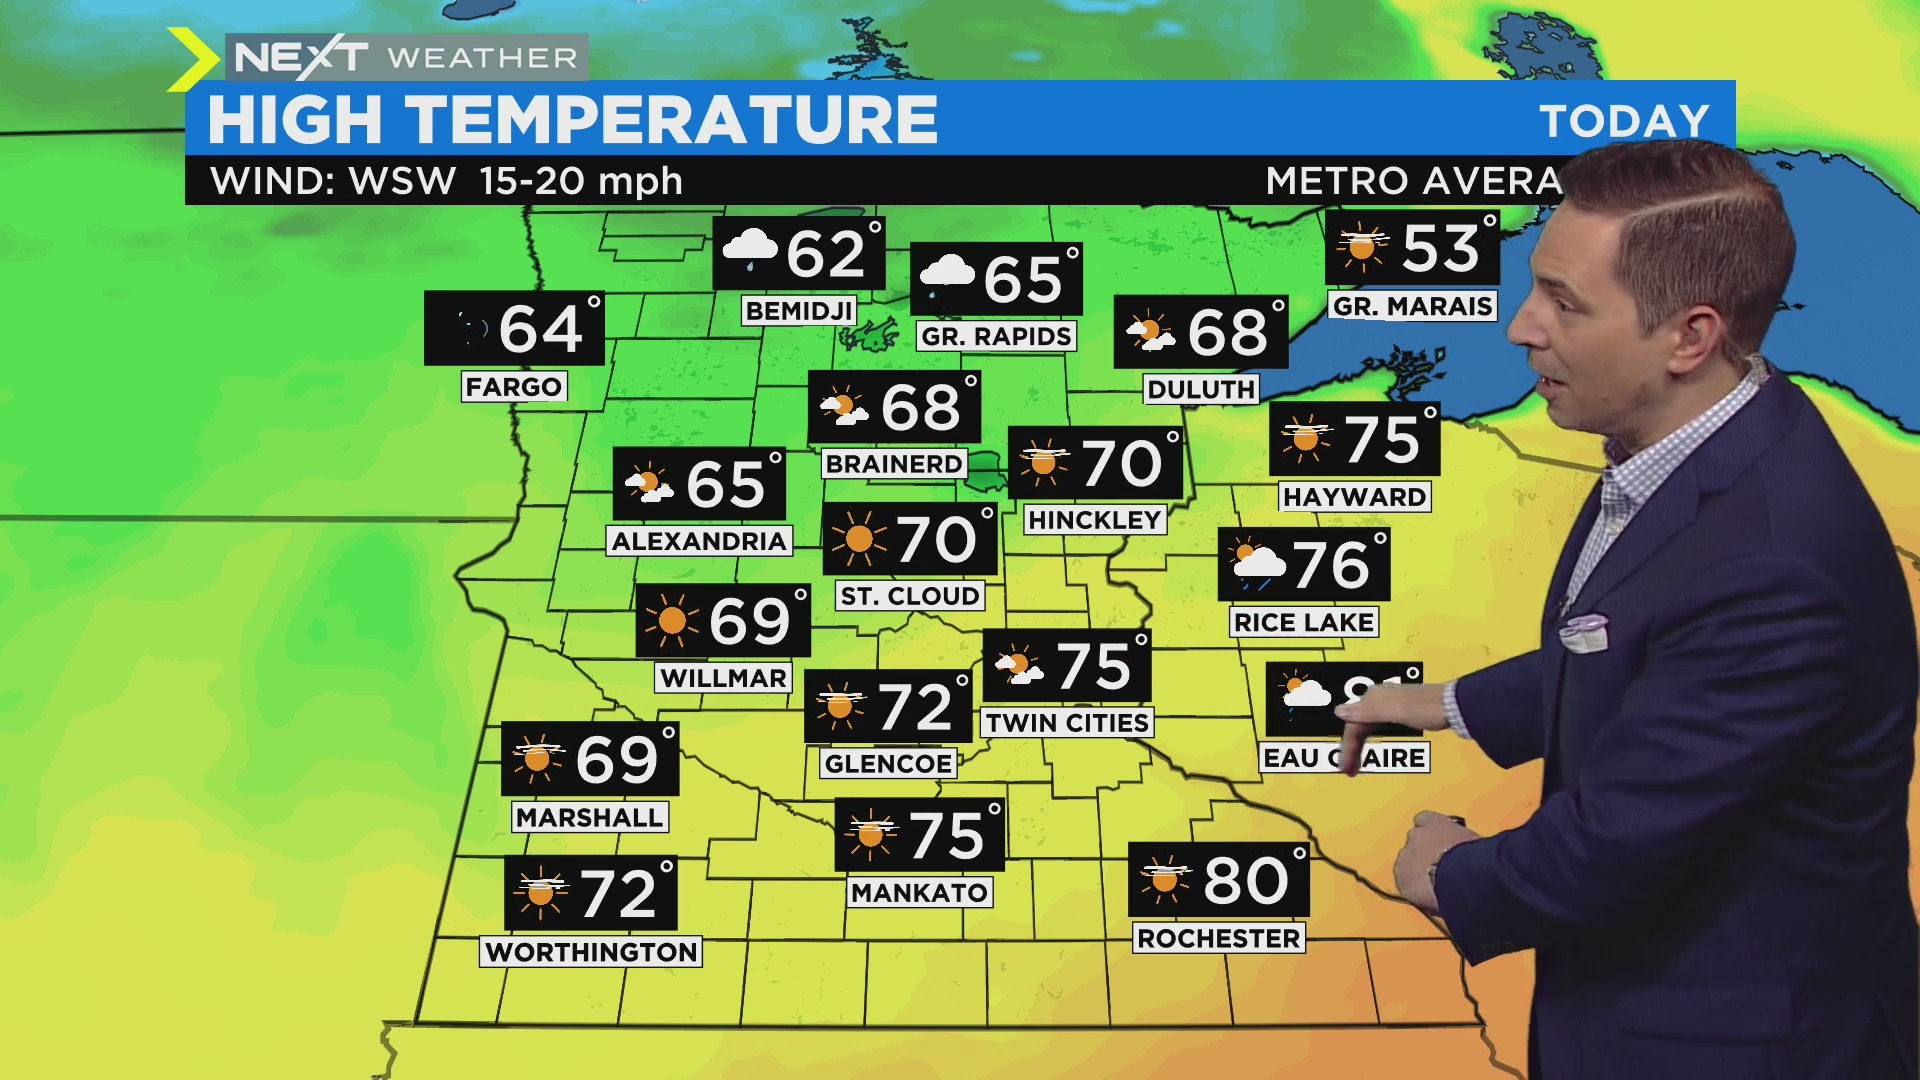 Minnesota Weather: Breezy, Cooler Saturday After Days Of Severe Weather – WCCO